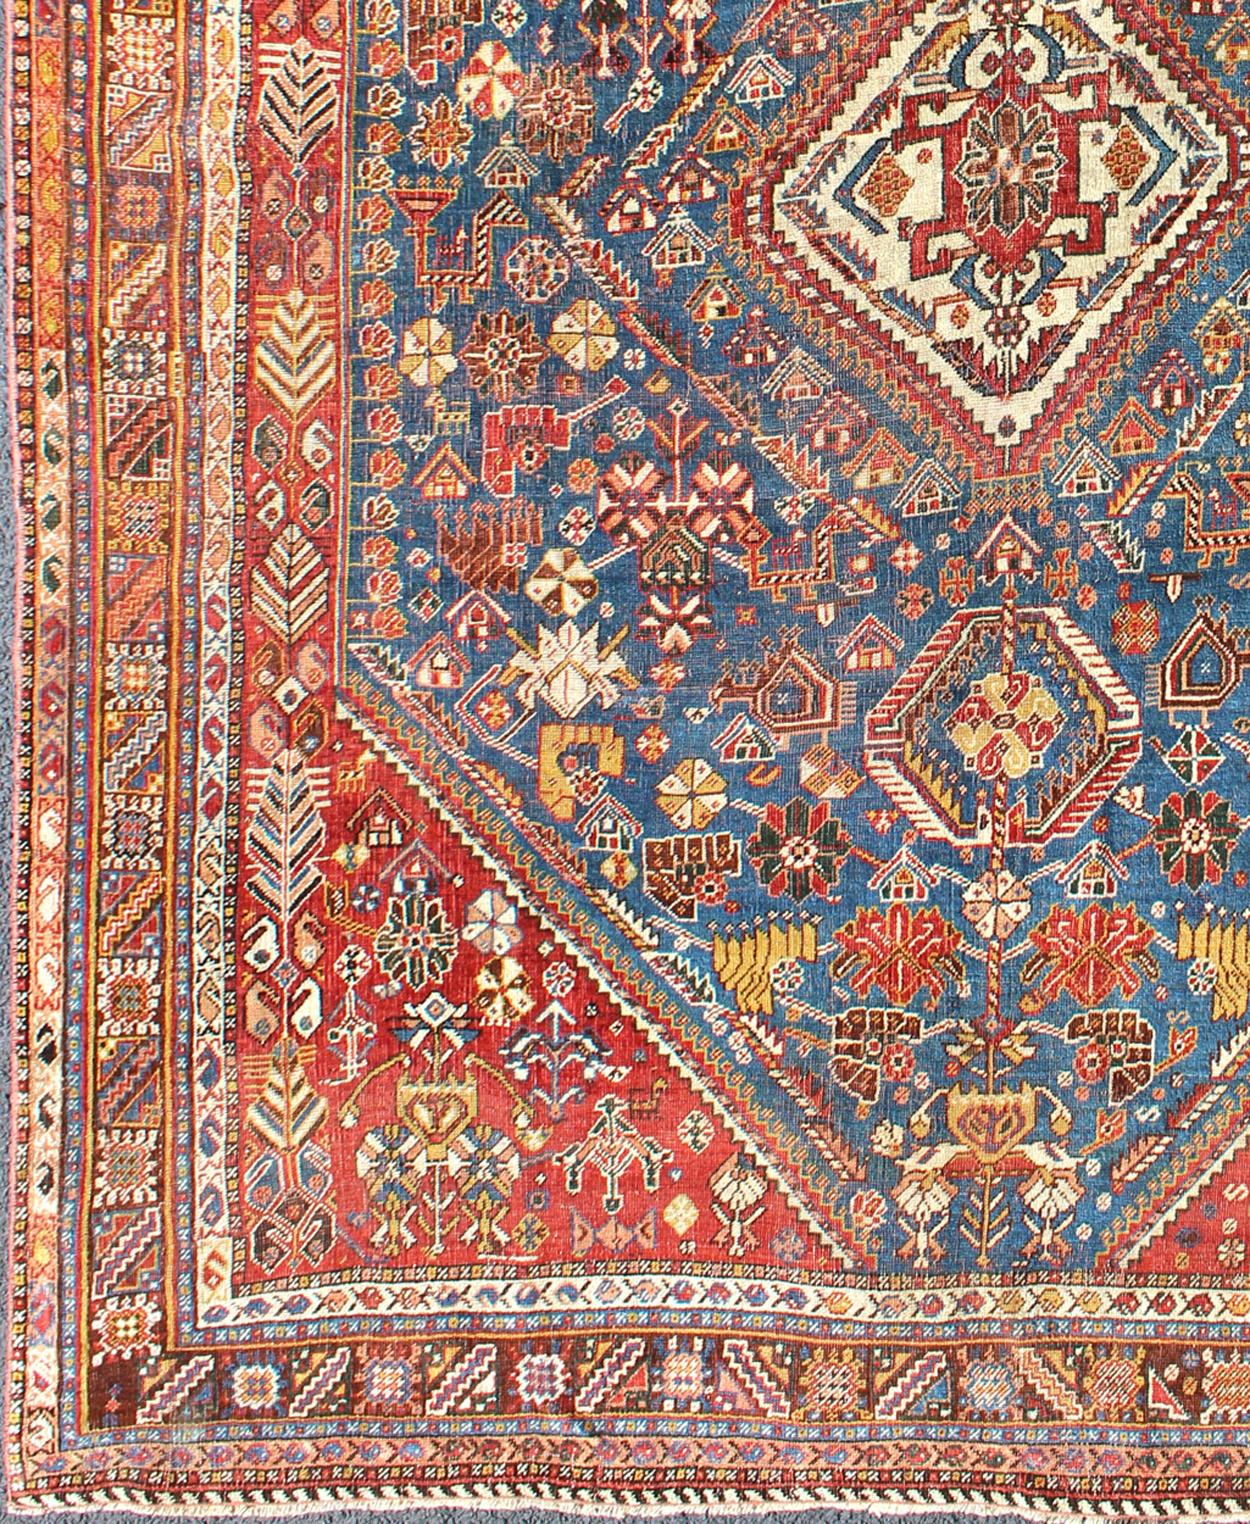 Qashqai Persian antique carpet in vibrant color tones with diamond medallion, rug ema-7558, country of origin / type: Iran / Qashqai, circa 1910.

The Qashqai nomads are found in the Fars province in southwest Iran. They move twice a year, between